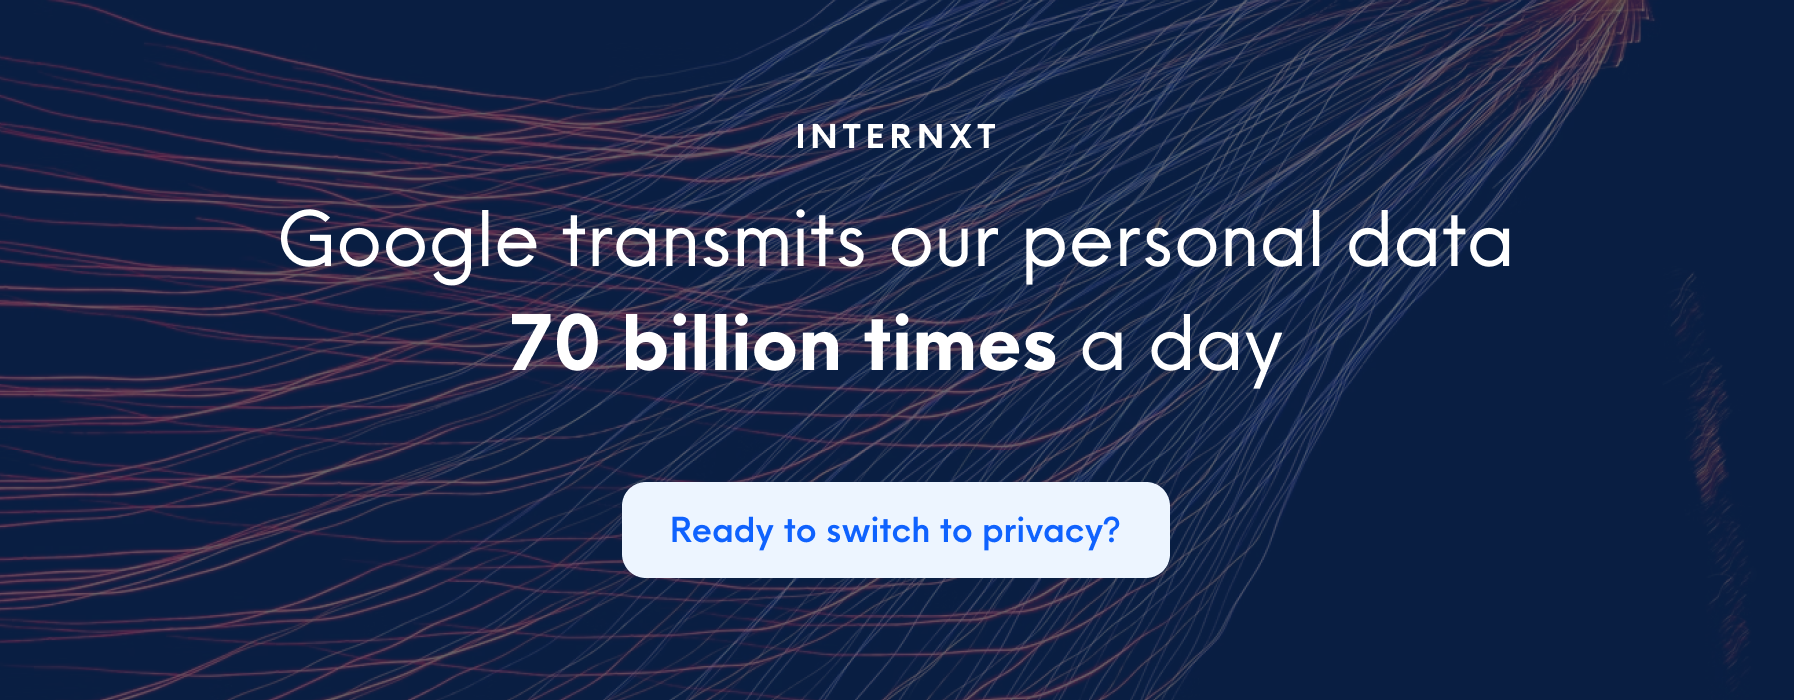 Internxt is a secure alternative to Google centralized services